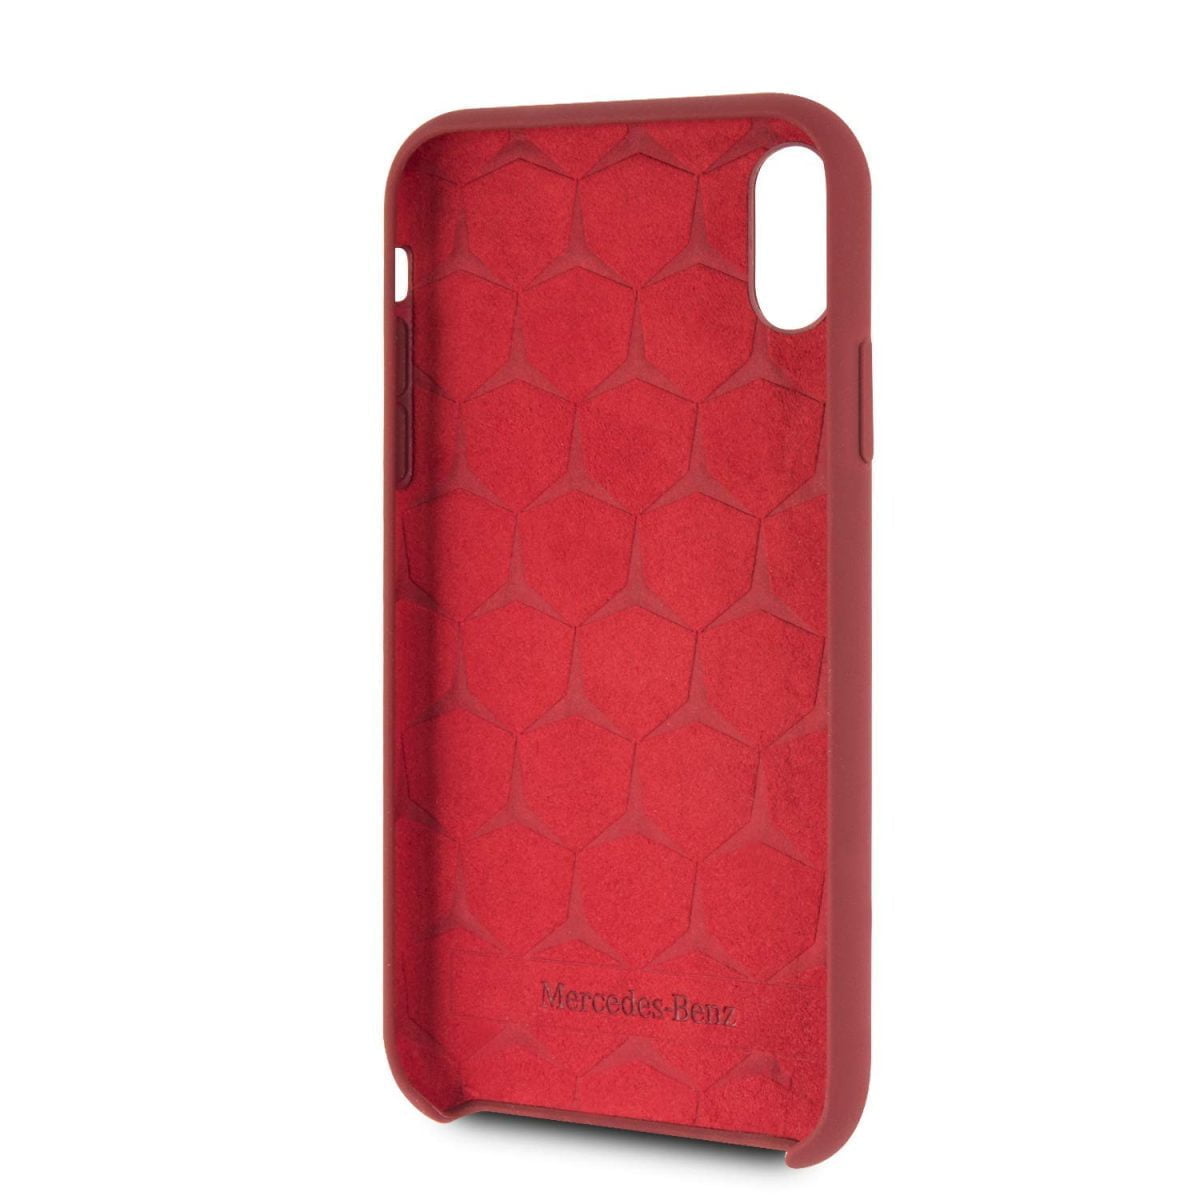 Mercedes Benz Iphone Xr Liquid Silicone Case With Microfiber Lining Red Drop Protection Easily Accessible Ports Officially Licensed 02 &Lt;H1&Gt;Iphone Xs Liquid Silicone Case With Microfiber Lining Red (Mercedes-Benz)&Lt;/H1&Gt; &Lt;Span Class=&Quot;Y2Iqfc&Quot; Lang=&Quot;En&Quot;&Gt;Mercedes-Benz Pattern Ii Series. The Minimalist And Captivating Aesthetics Of Mercedes-Benz Interior Design Have Been Transferred Silicon. They Guarantee A Unique Look And Safety For Your Phone. - Silicon Case With A Metallic Mercedes-Benz Logo Has A 3D Effect - The Unique Finish Enhances The Look And Quality Of This Case - Designed With Easy Access To Ports And Buttons - Case Compatible With Wireless Chargers Collection: Pattern Line Twister Type: Hardcase Material:silicon Red  Compatibility: Iphone X / Xs Product Manufactured Under License From Mercedes-Benz.&Lt;/Span&Gt; Iphone Silicon Cases Iphone Xs Liquid Silicone Case With Microfiber Lining Red (Mercedes-Benz)